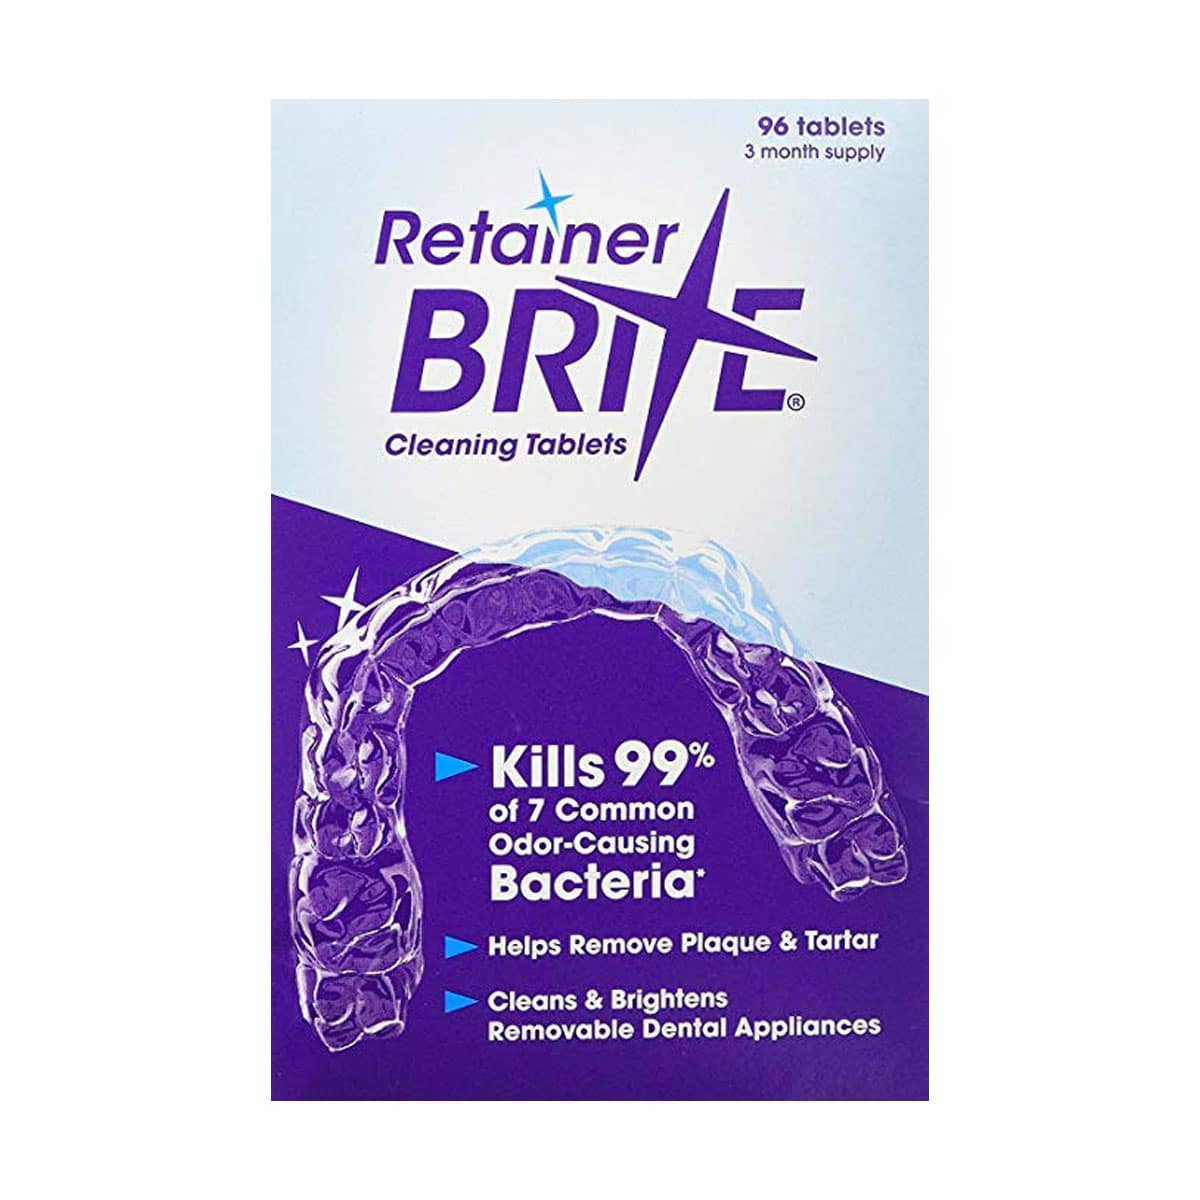 Retainer Brite Cleaning Tablets (96 Tablets)